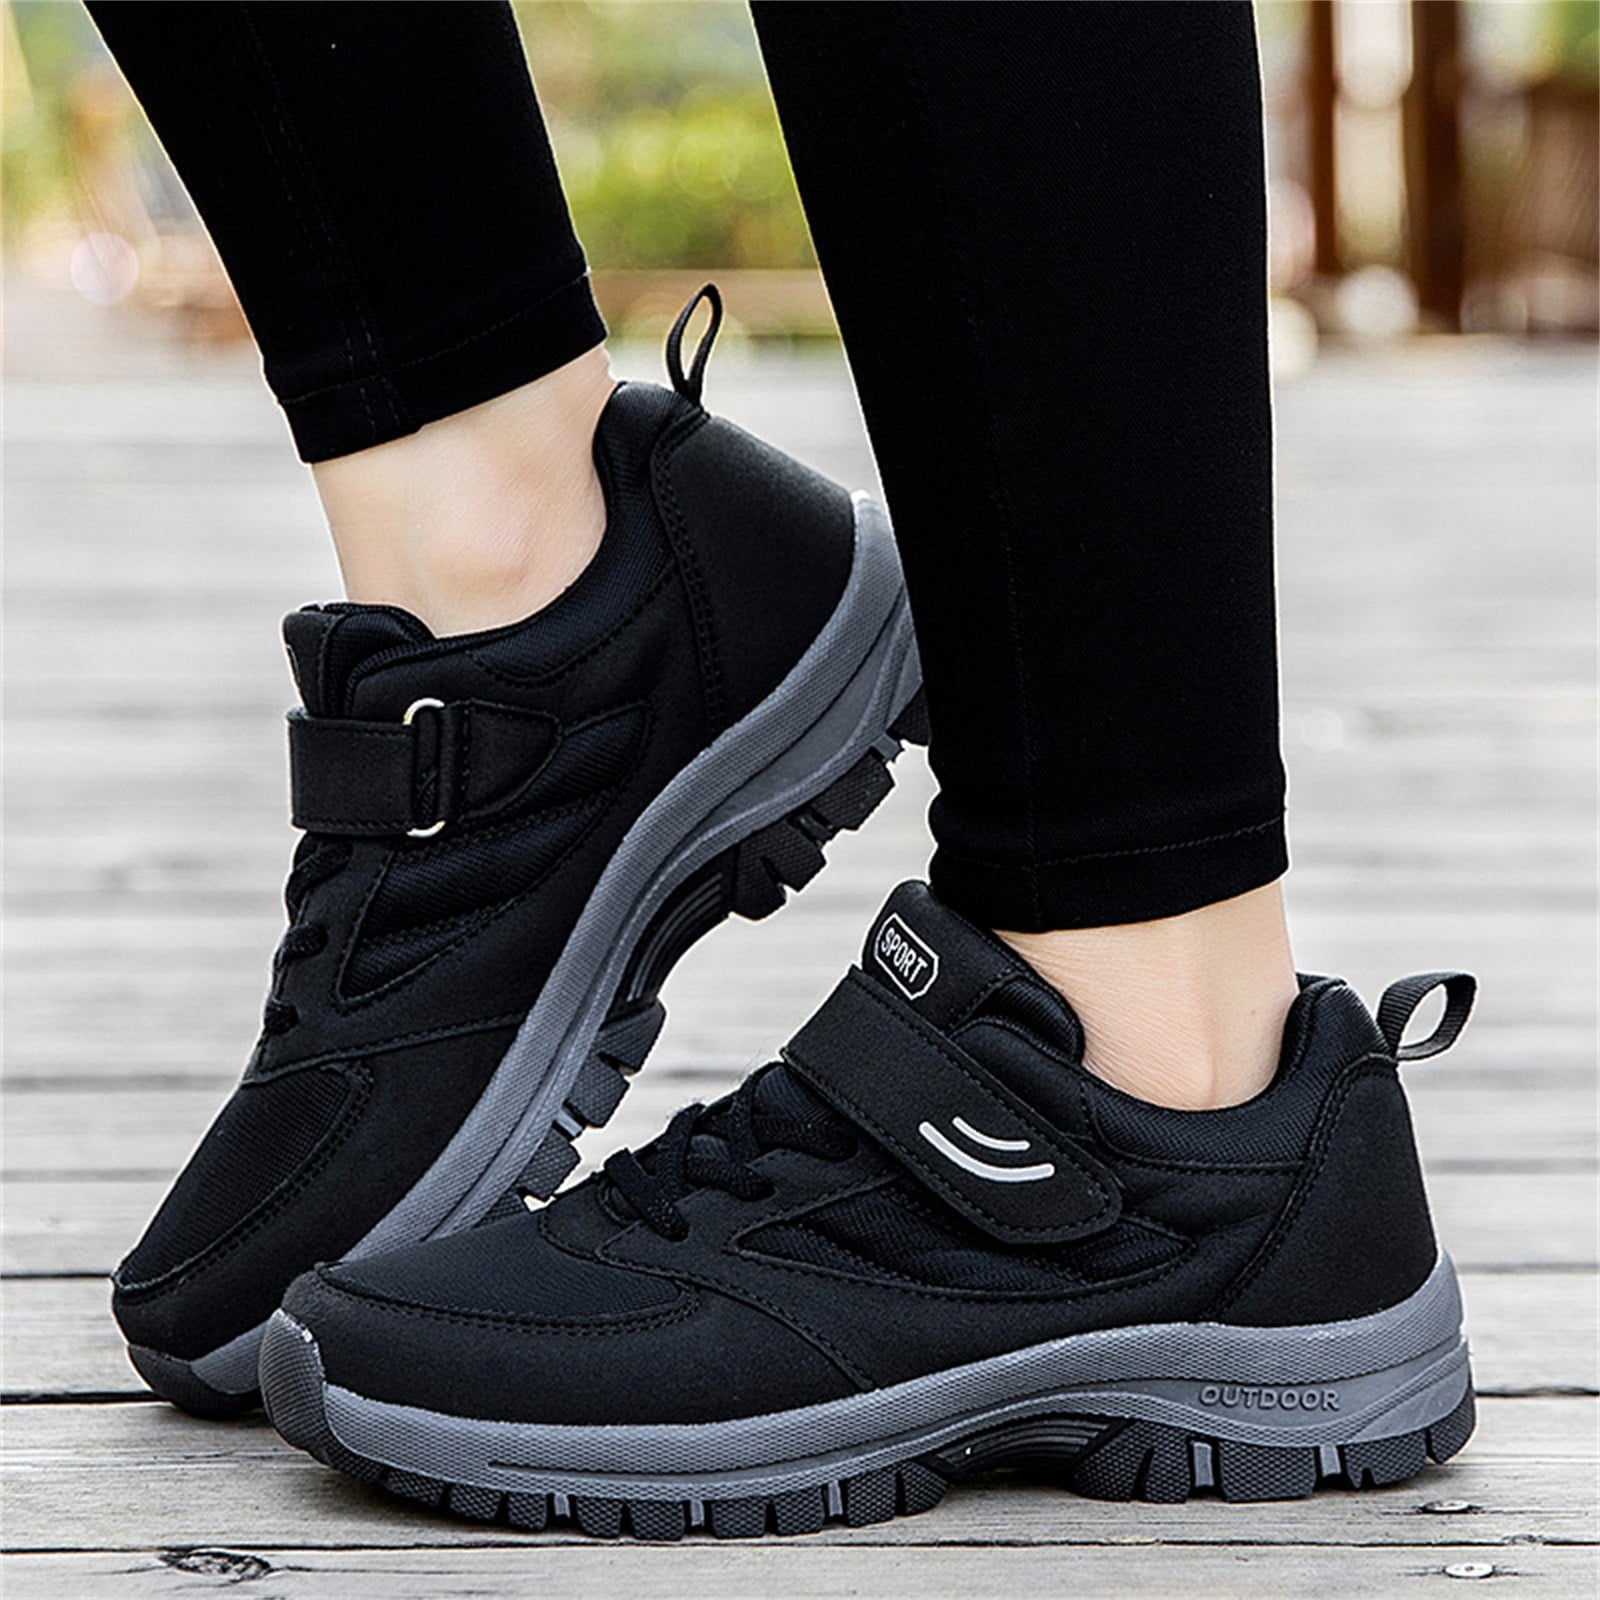 New Trend Ladies Walking Lace-up Sneaker Shoes for Ladies Women